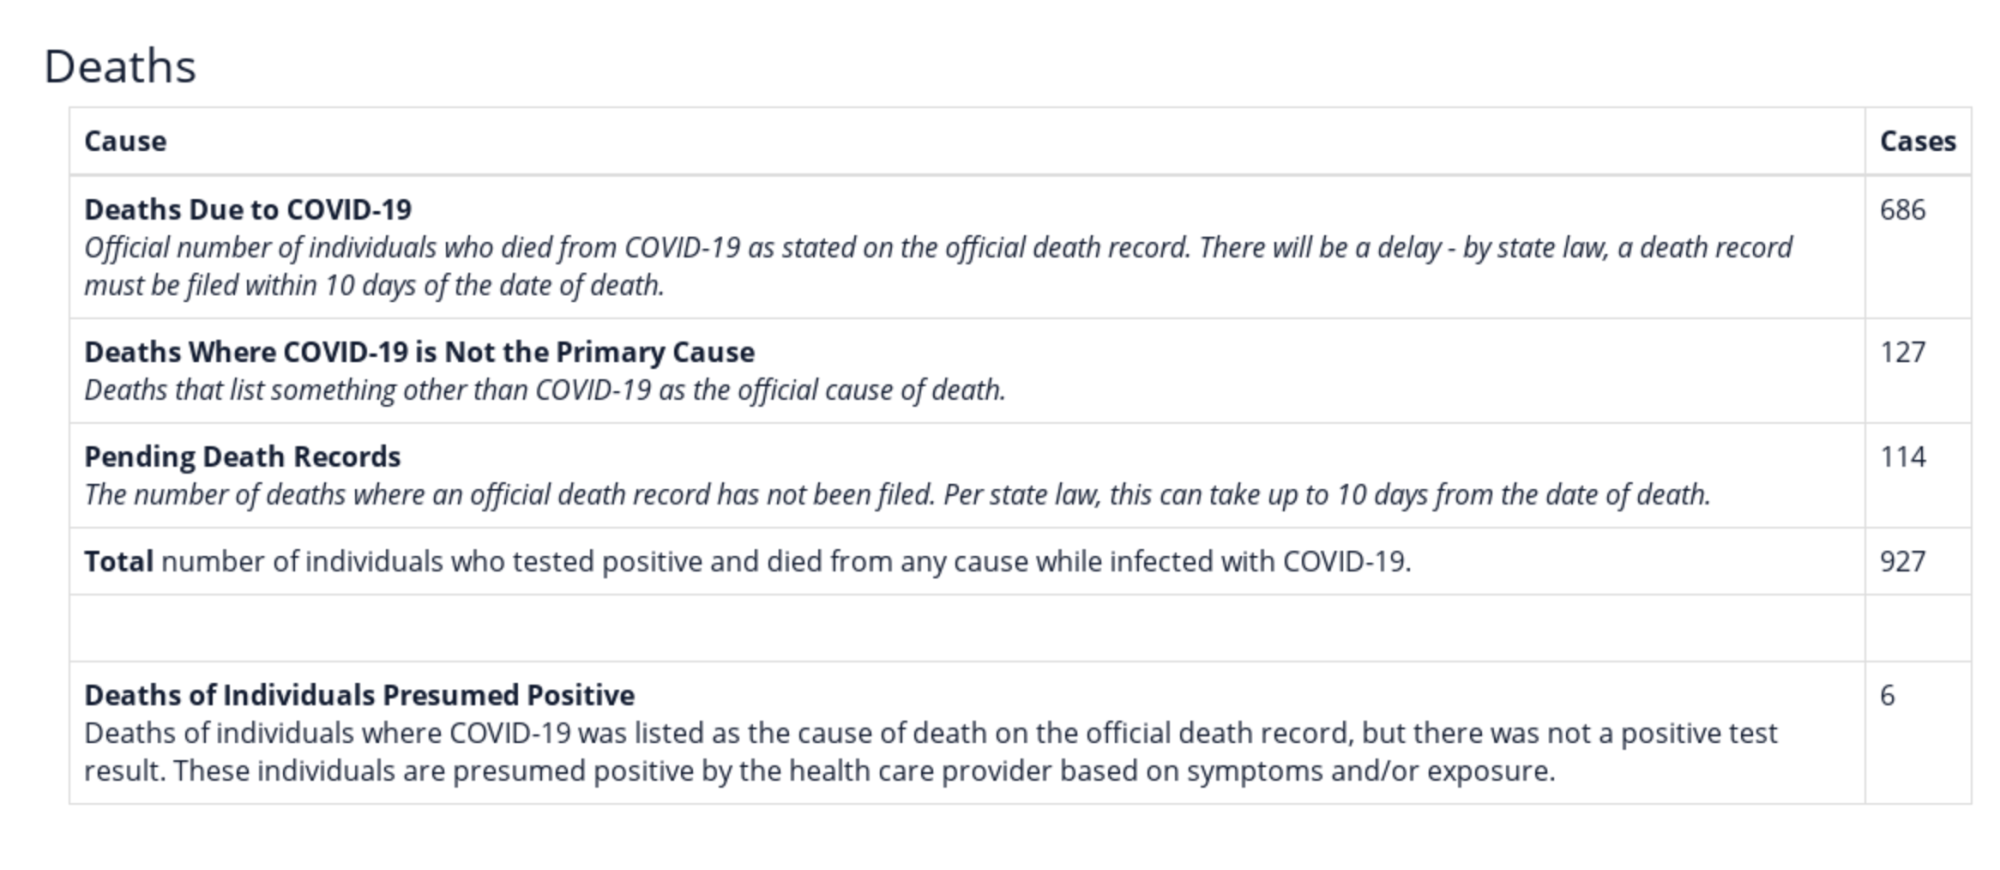 Screen shot of part of North Dakota's coronavirus data page showing the four ways deaths are reported: Deaths Due to COVID-19, Deaths Where COVID-19 is Not the Primary Cause, Pending Death Records, and Deaths of Individuals Presumed Positive.